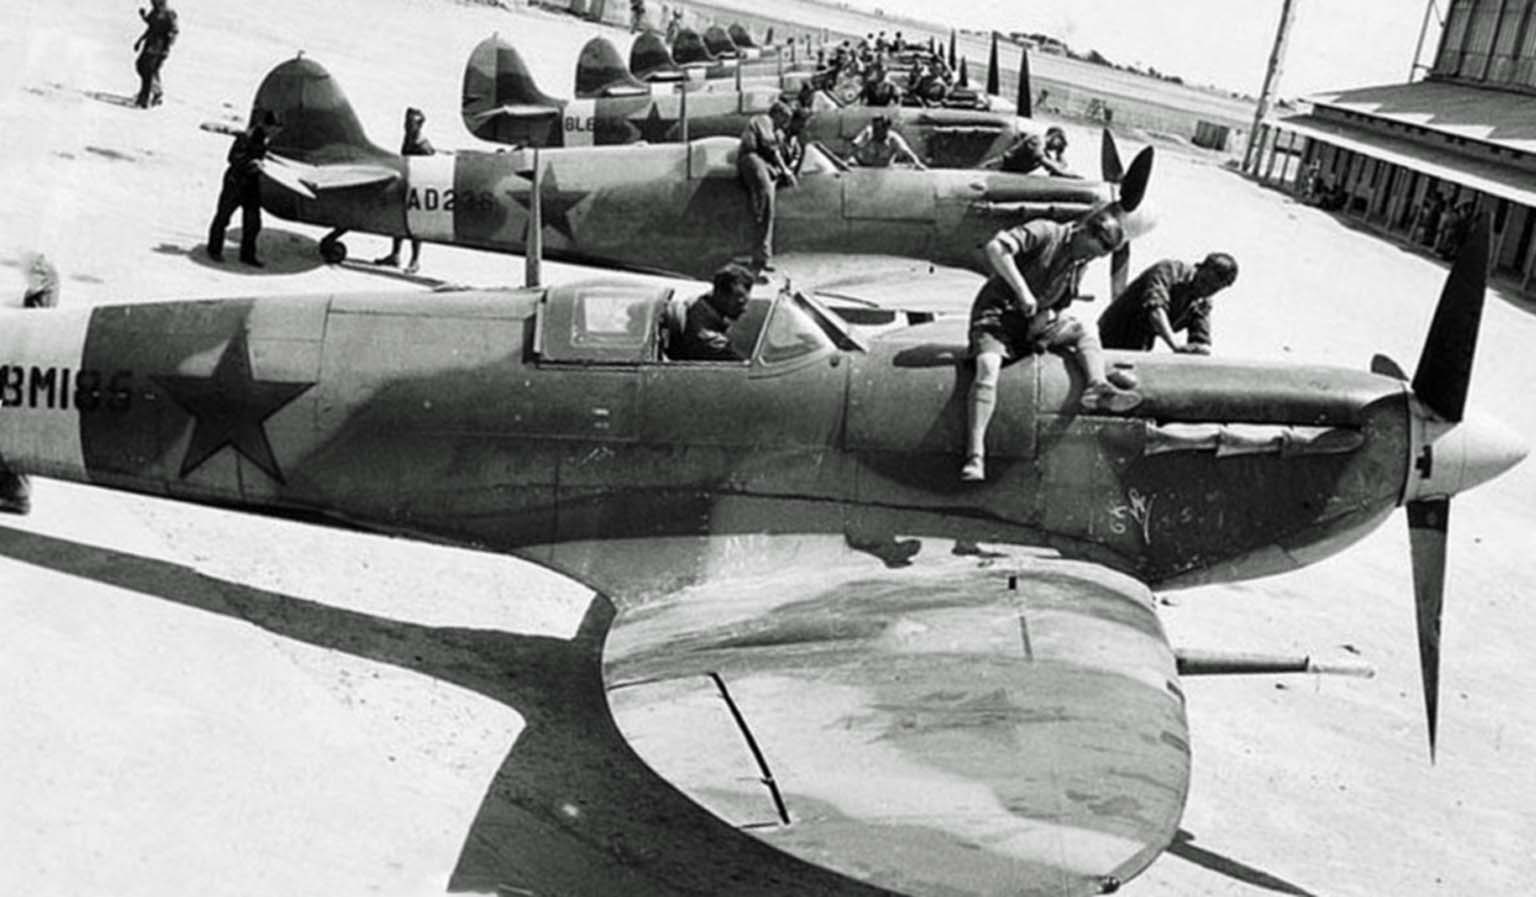 Spitfire fighters